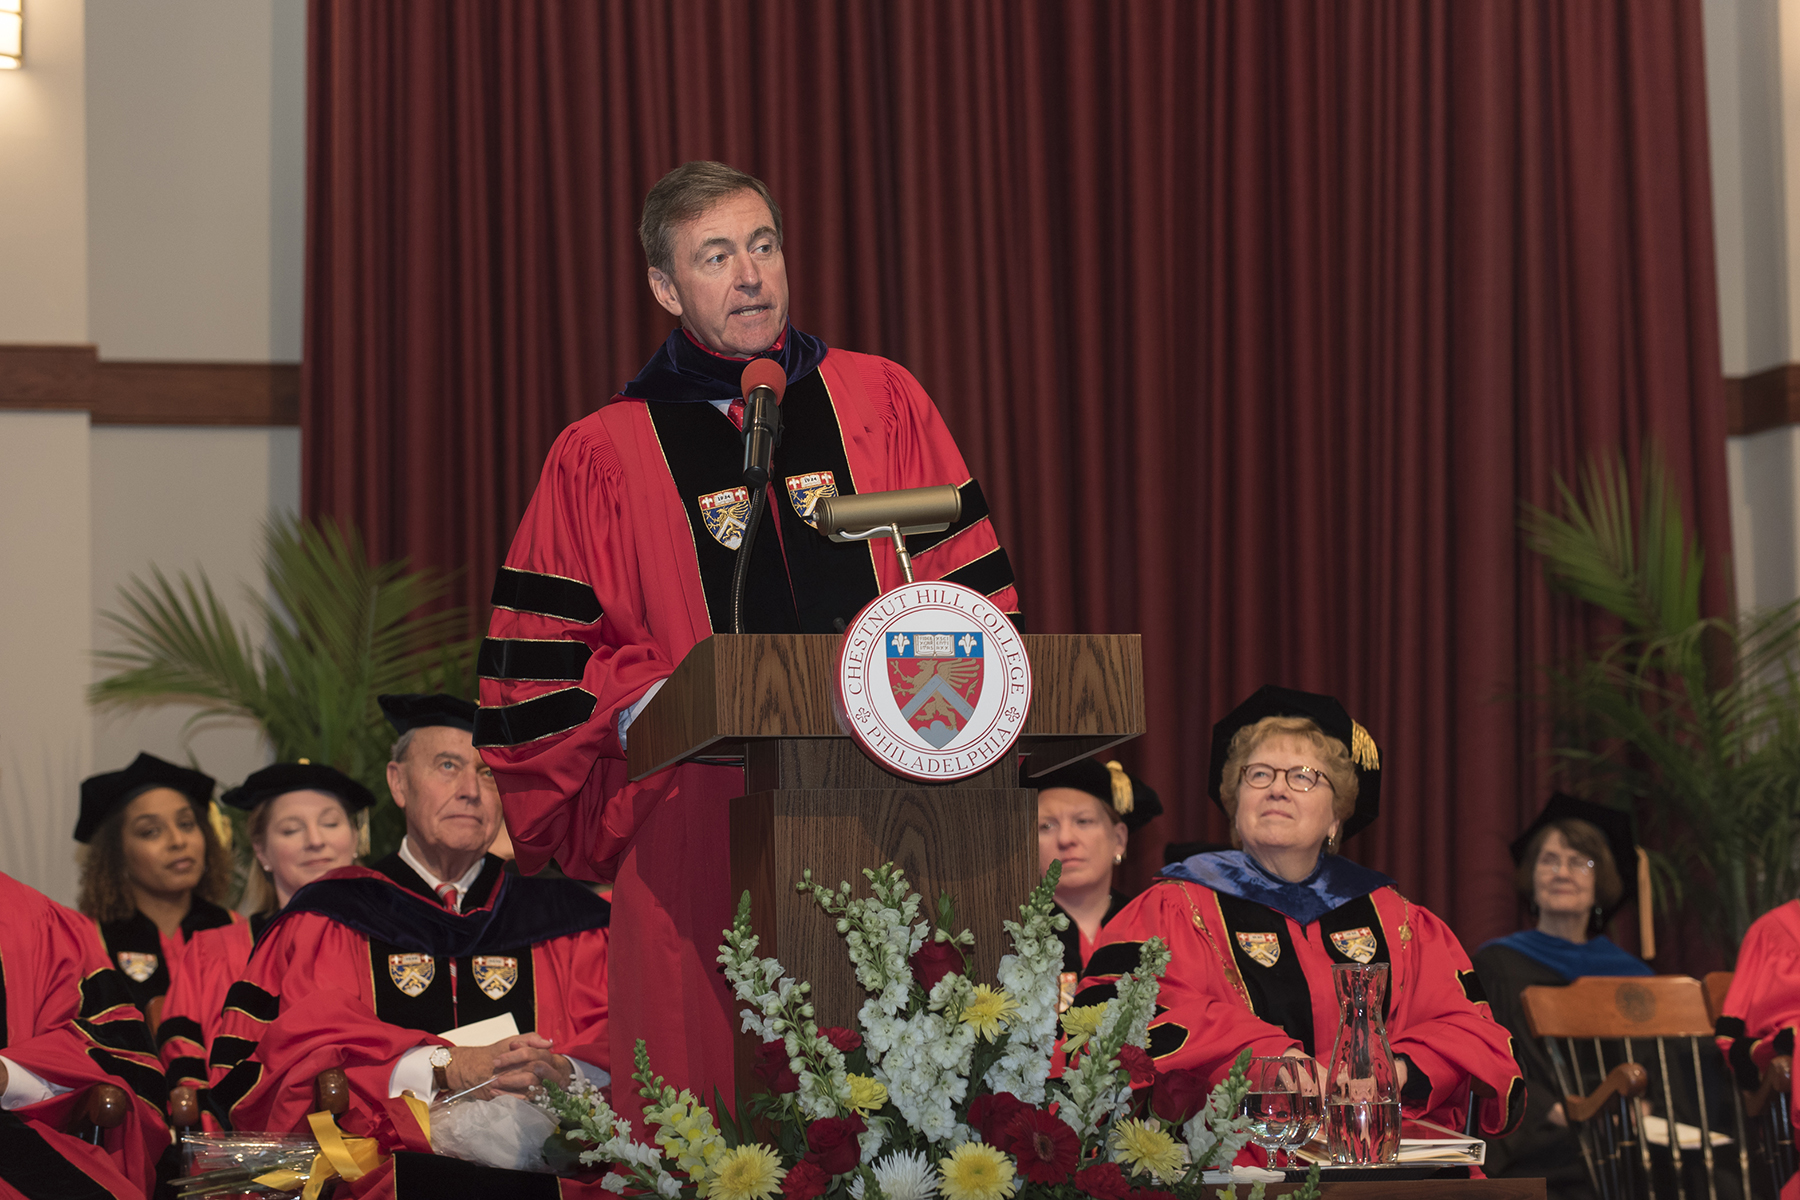 Commencement speaker, Chris Lowney, urges graduates to consider themselves to be leaders.